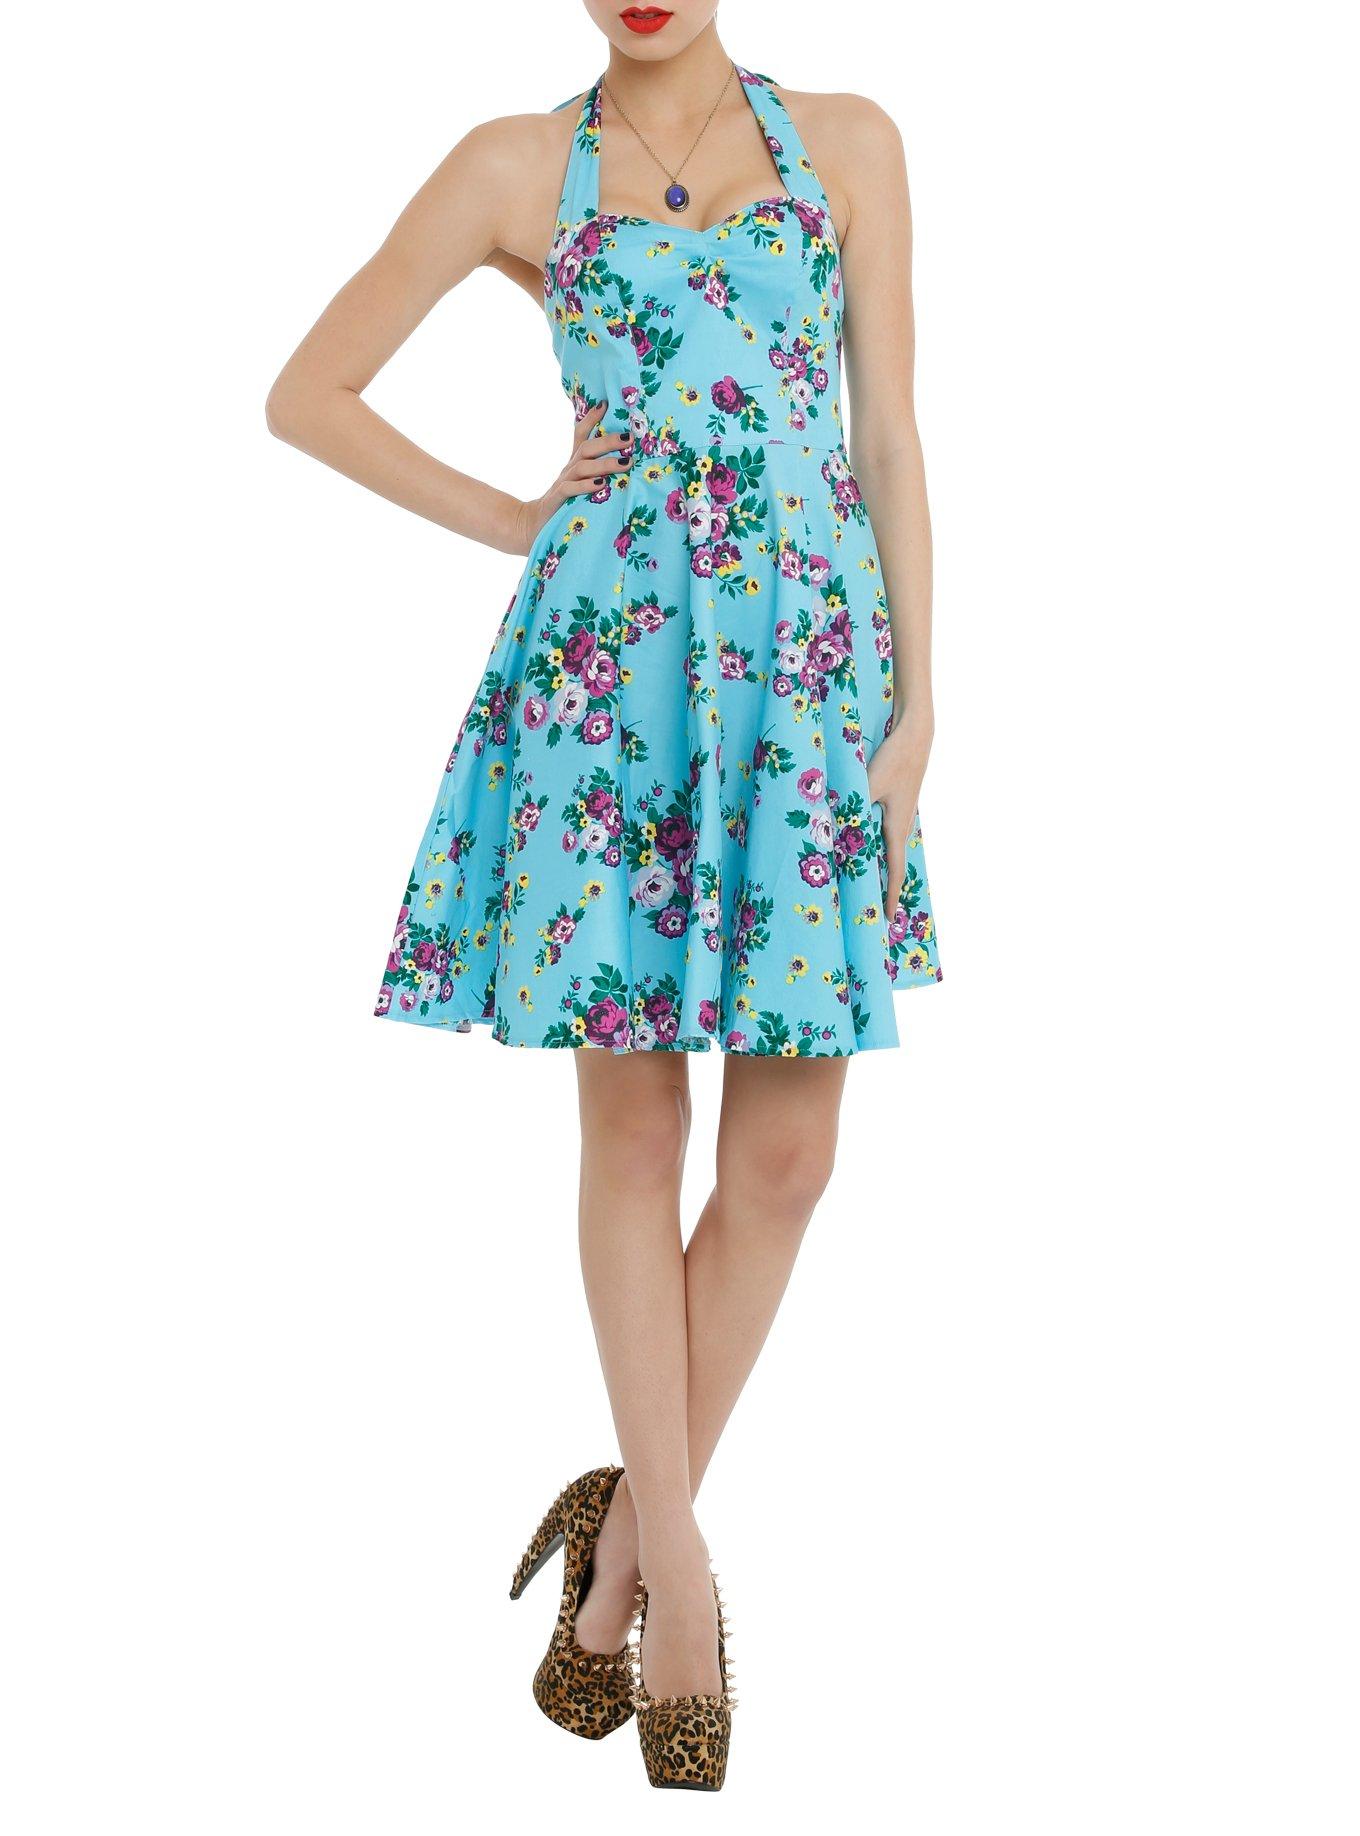 Hell Bunny Turquoise Floral Halter Dress | Hot Topic